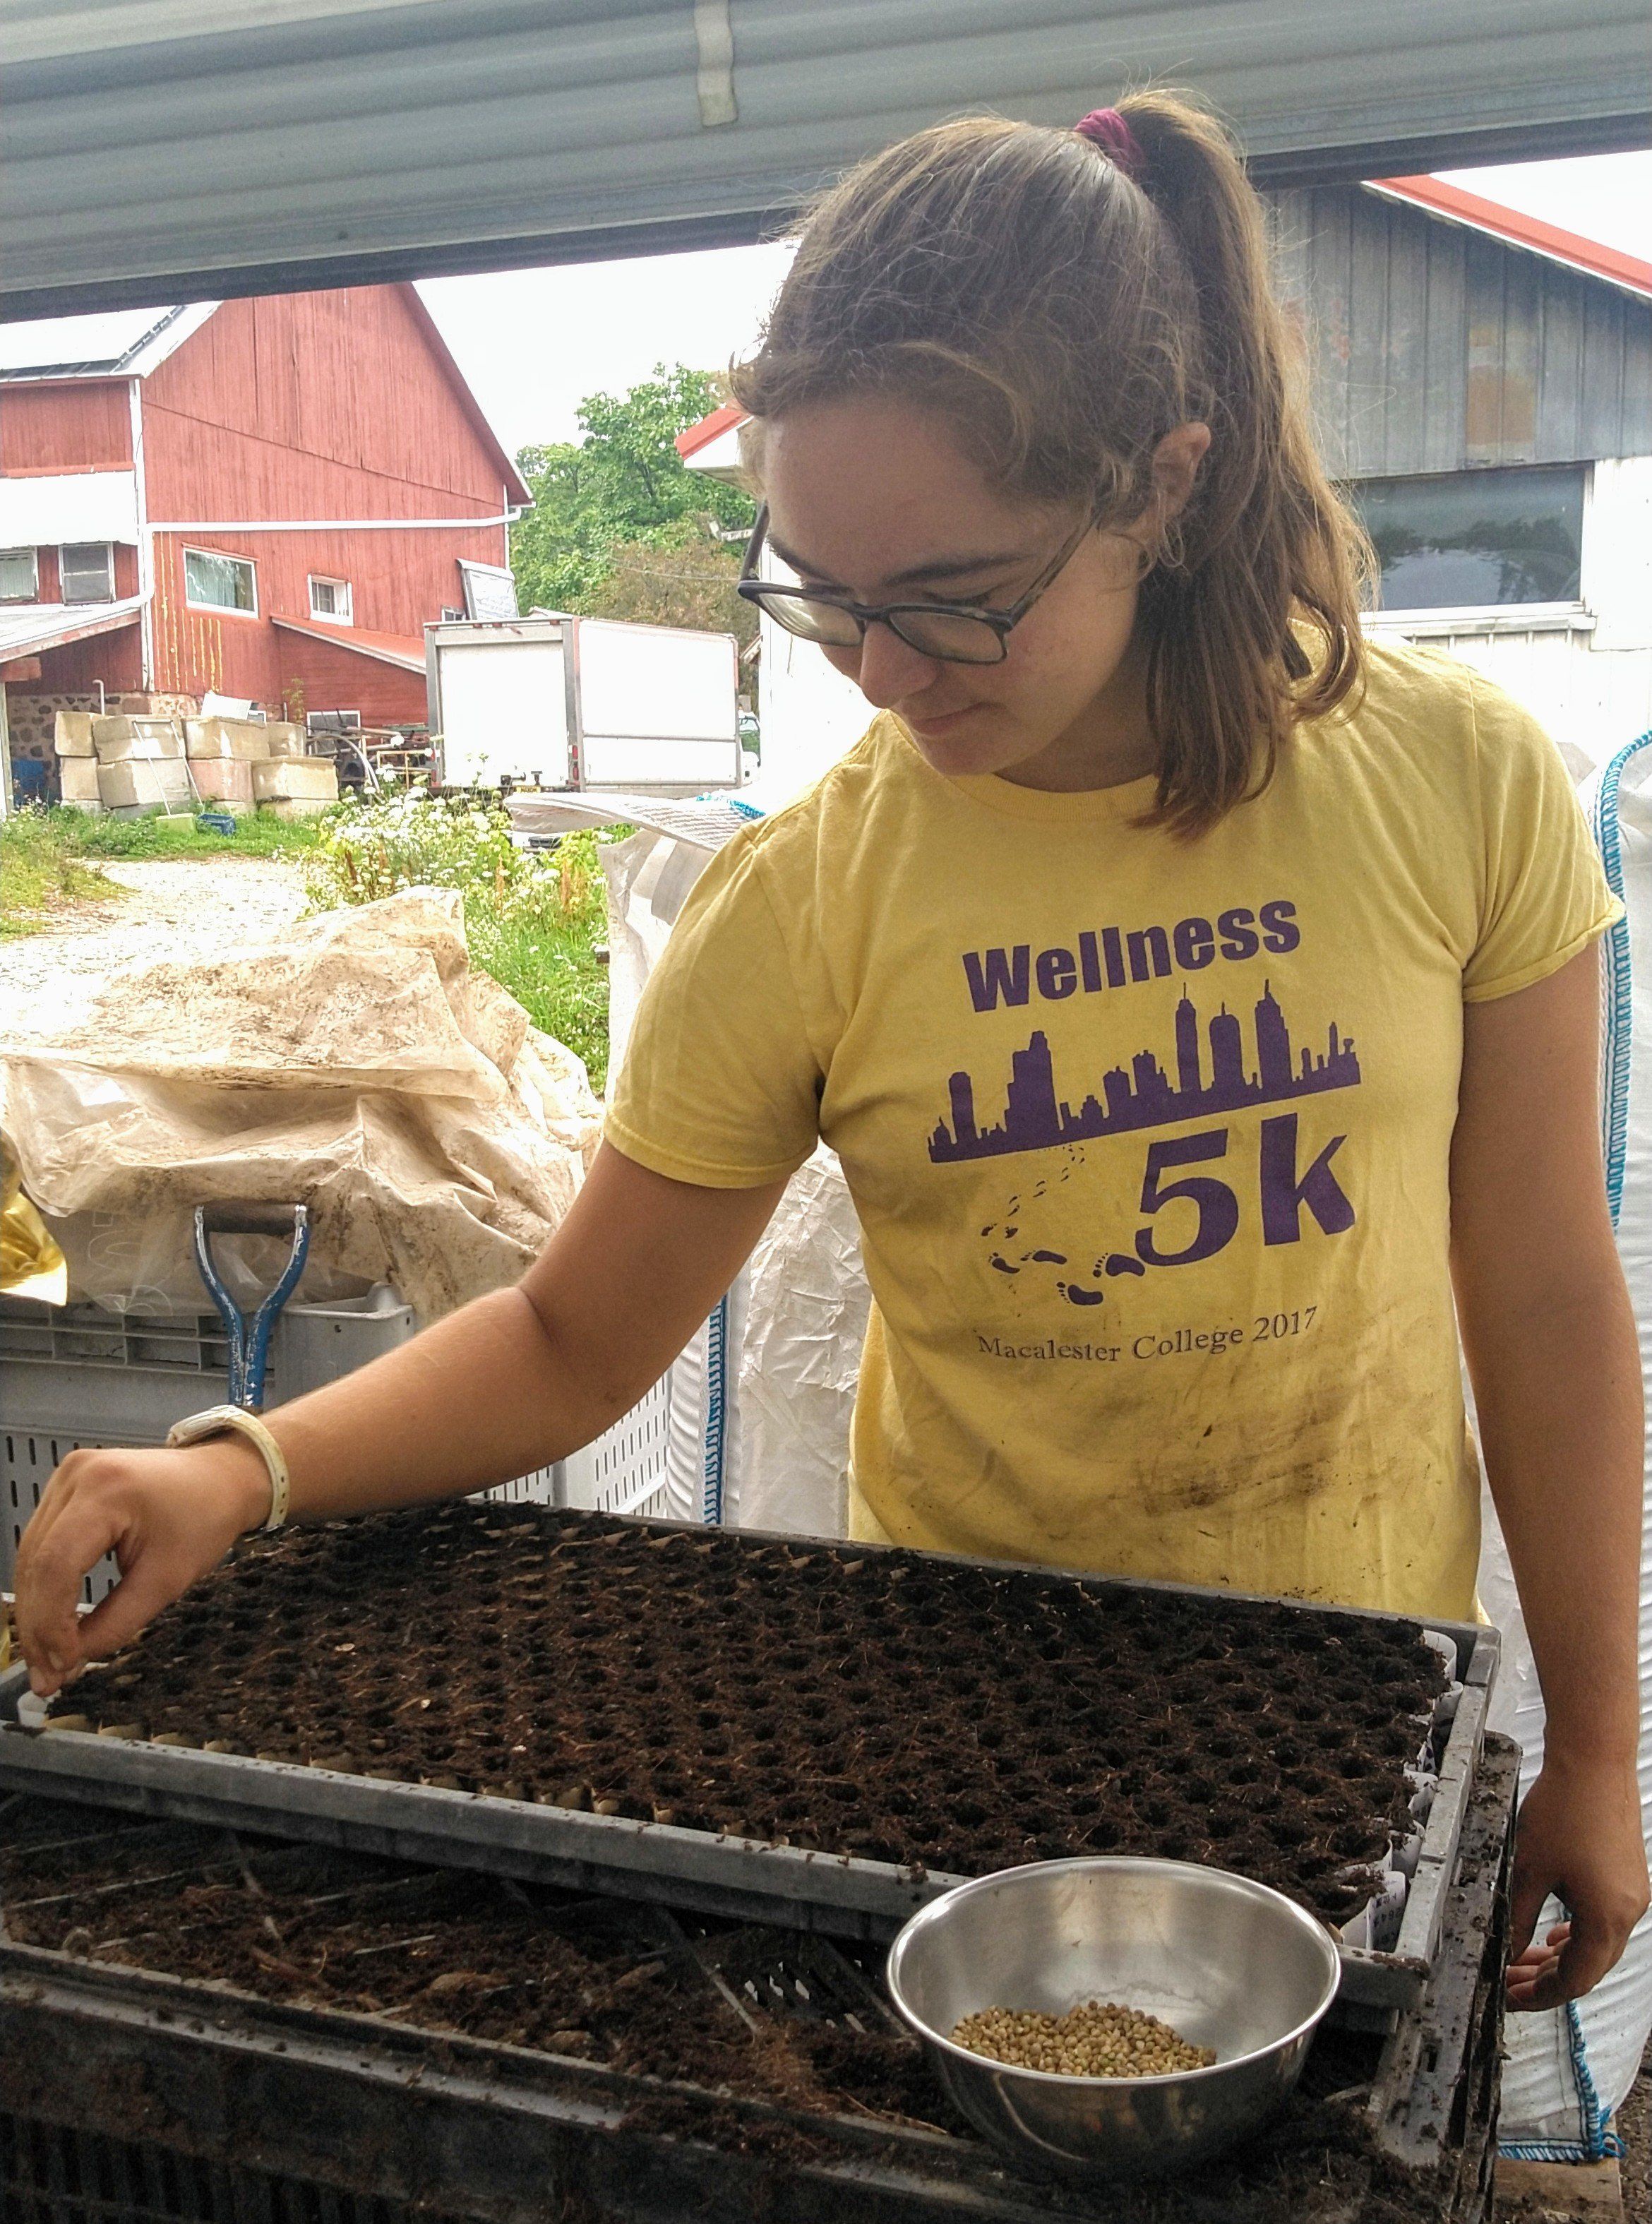 Next Happening: Farm Happenings for August 11, 2020